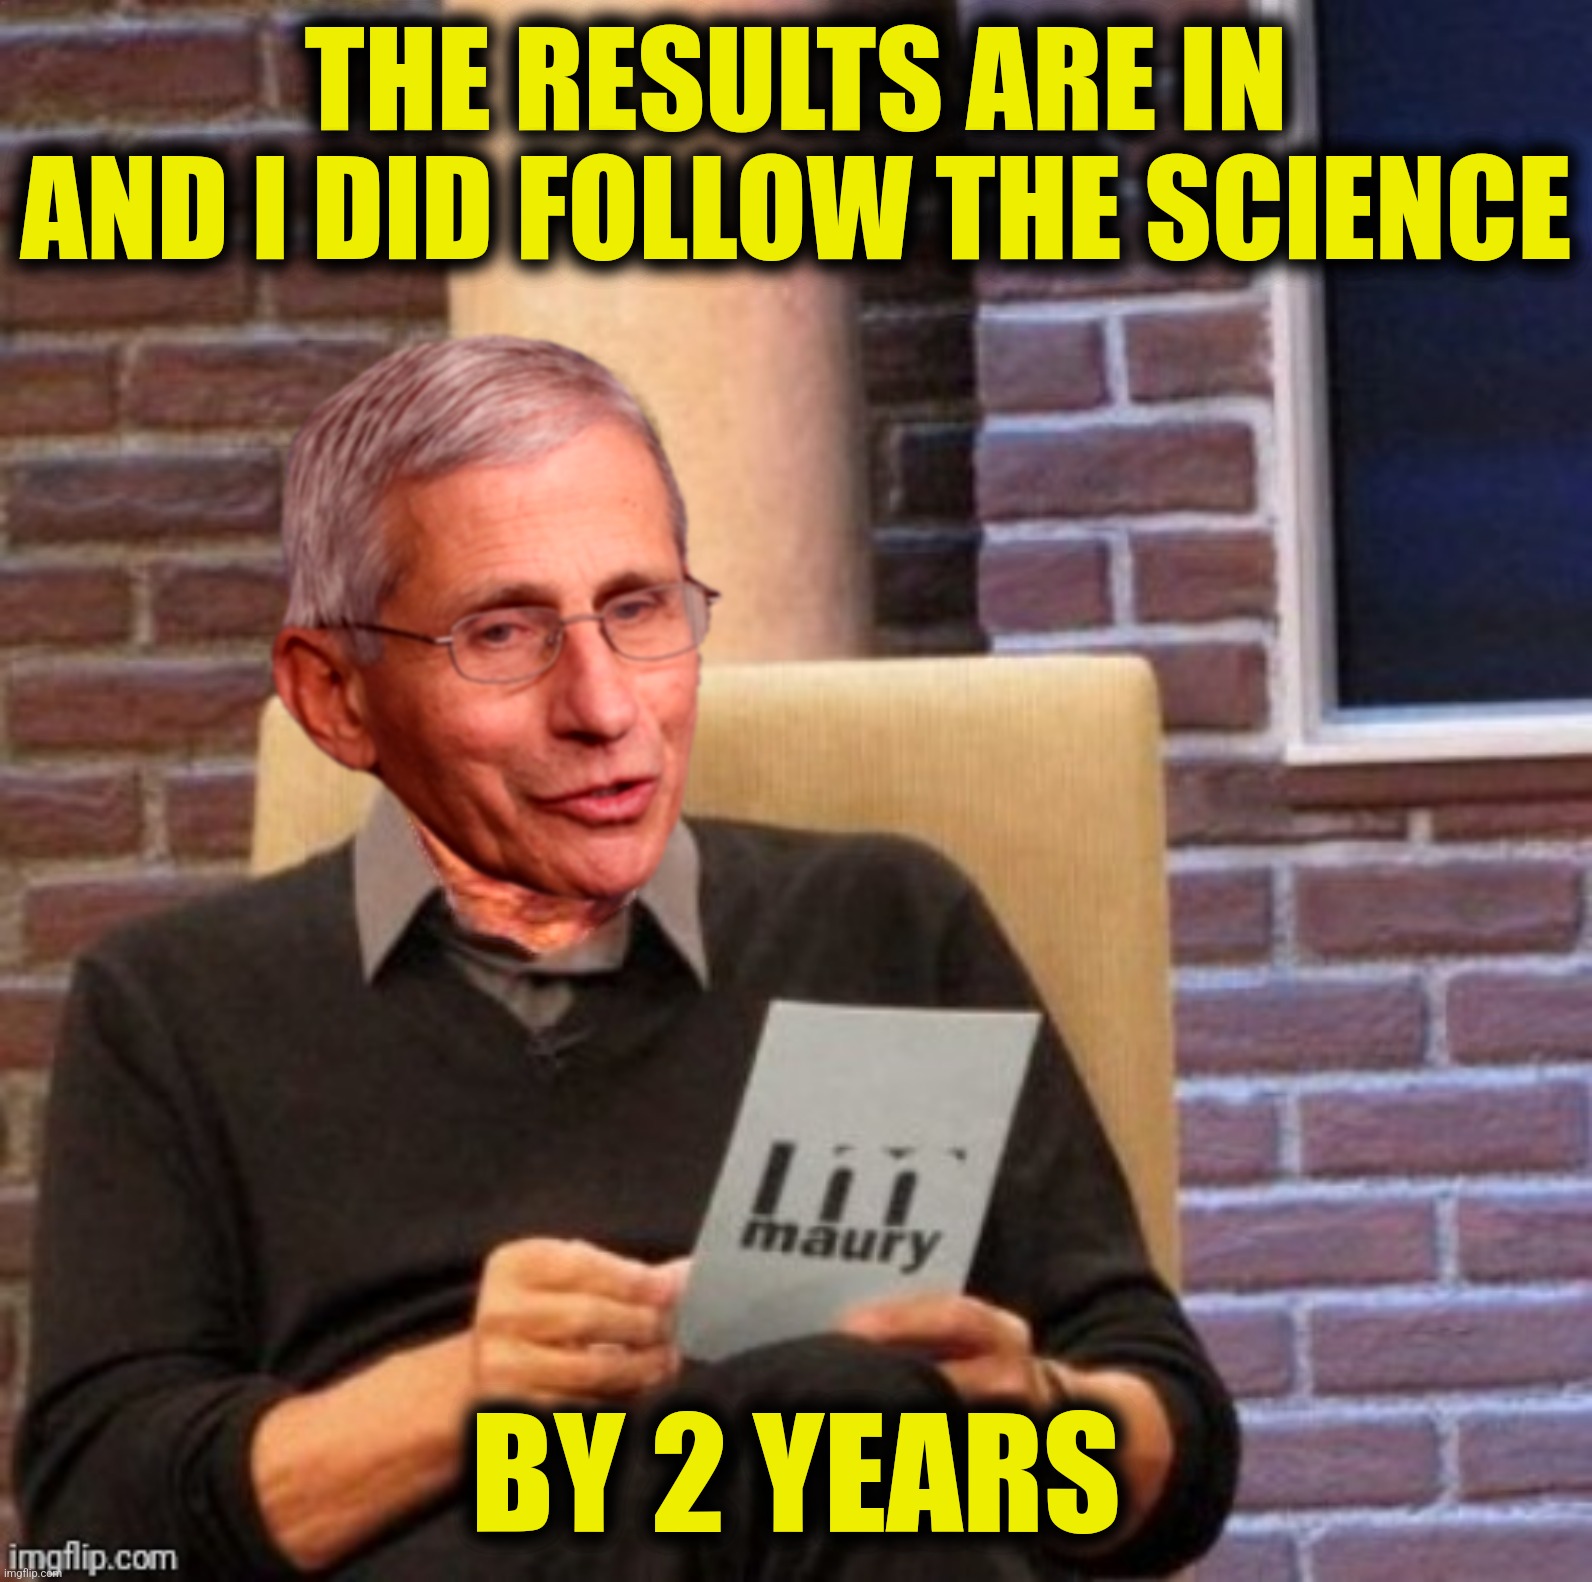 THE RESULTS ARE IN AND I DID FOLLOW THE SCIENCE BY 2 YEARS | made w/ Imgflip meme maker